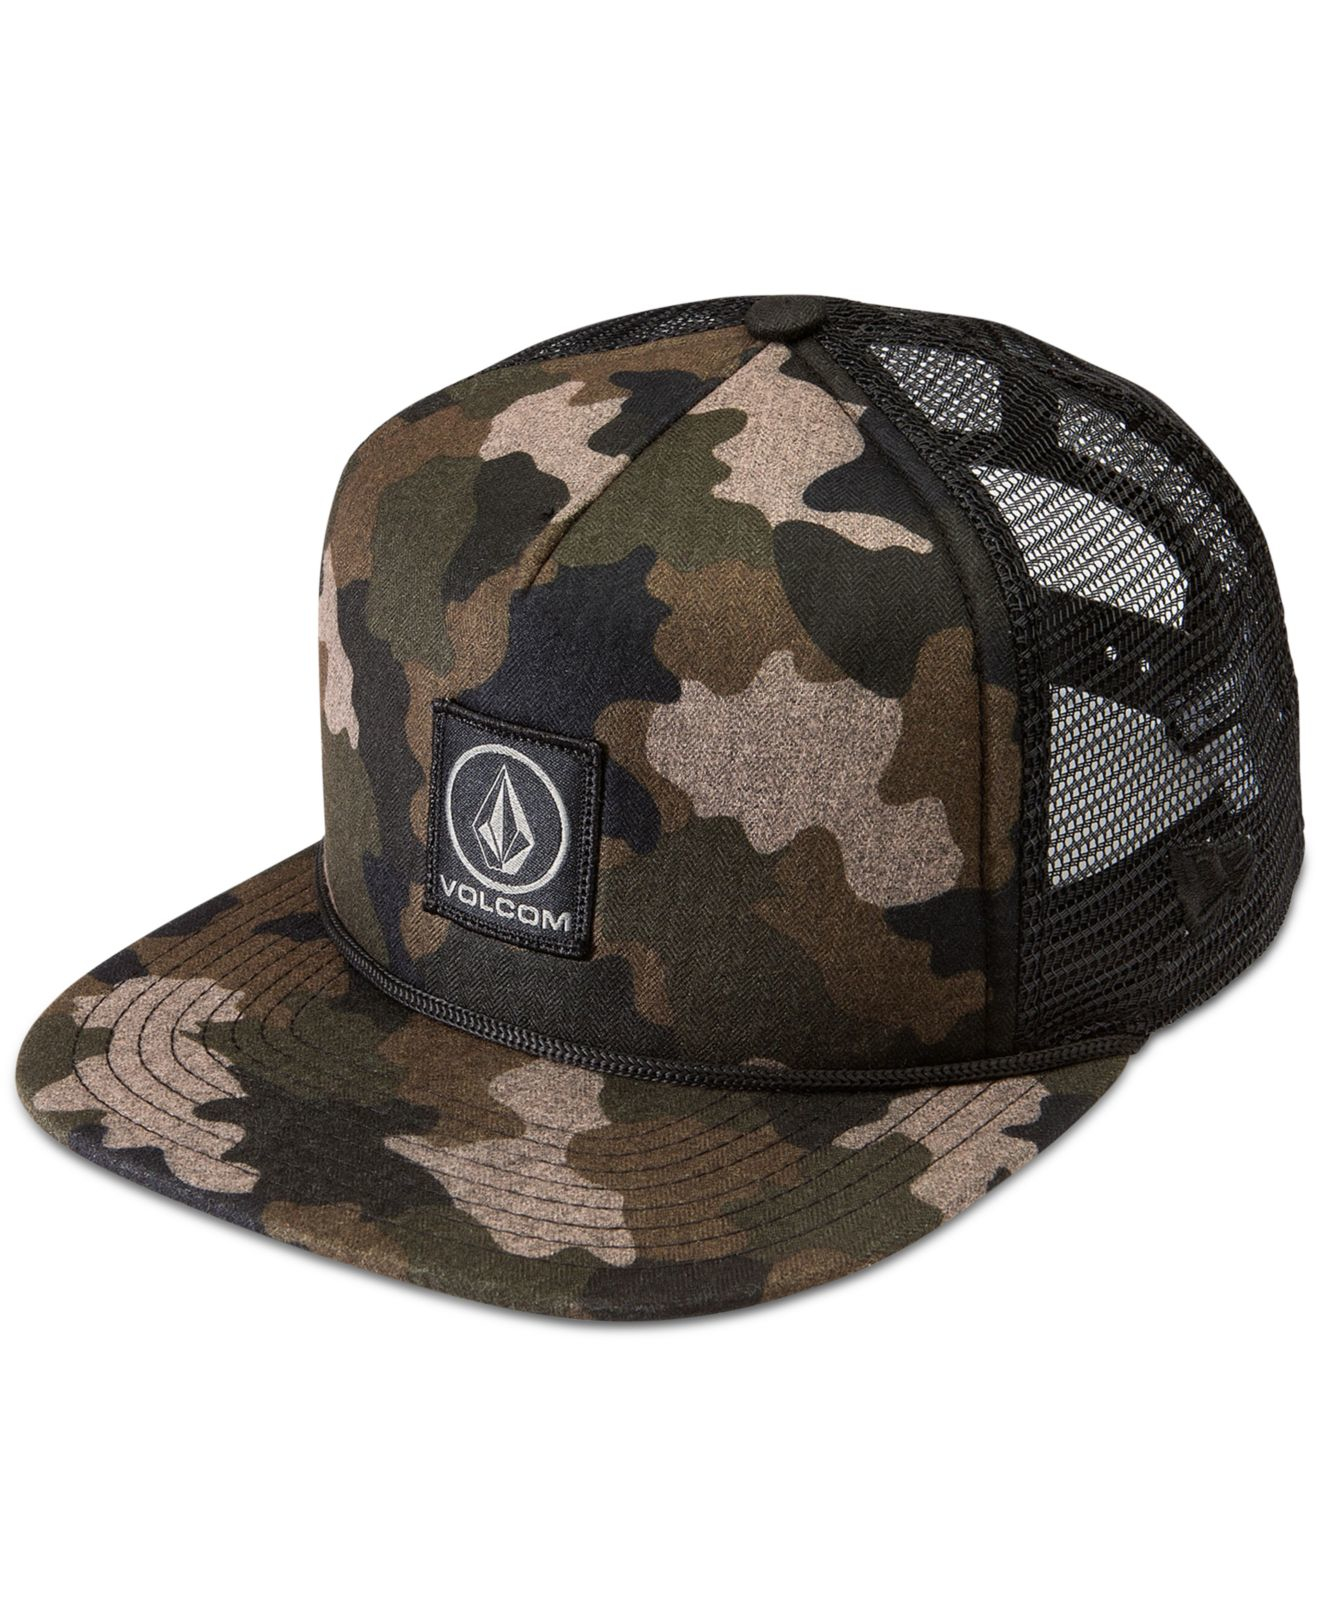 Volcom Bondo Cheese Camouflage Hat in Green for Men - Lyst